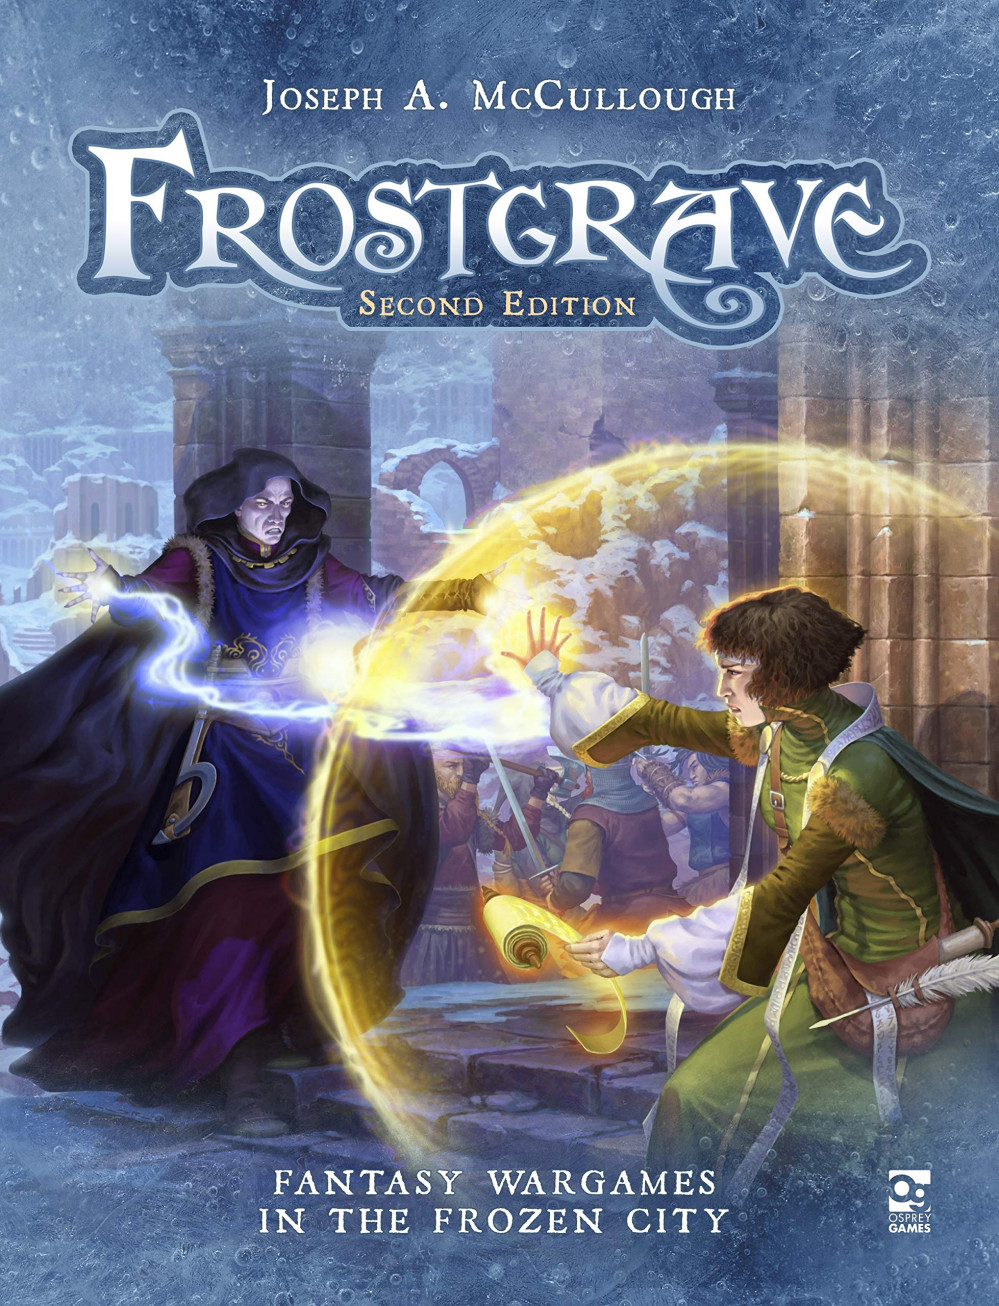 Frostgrave | New edition new Warband!